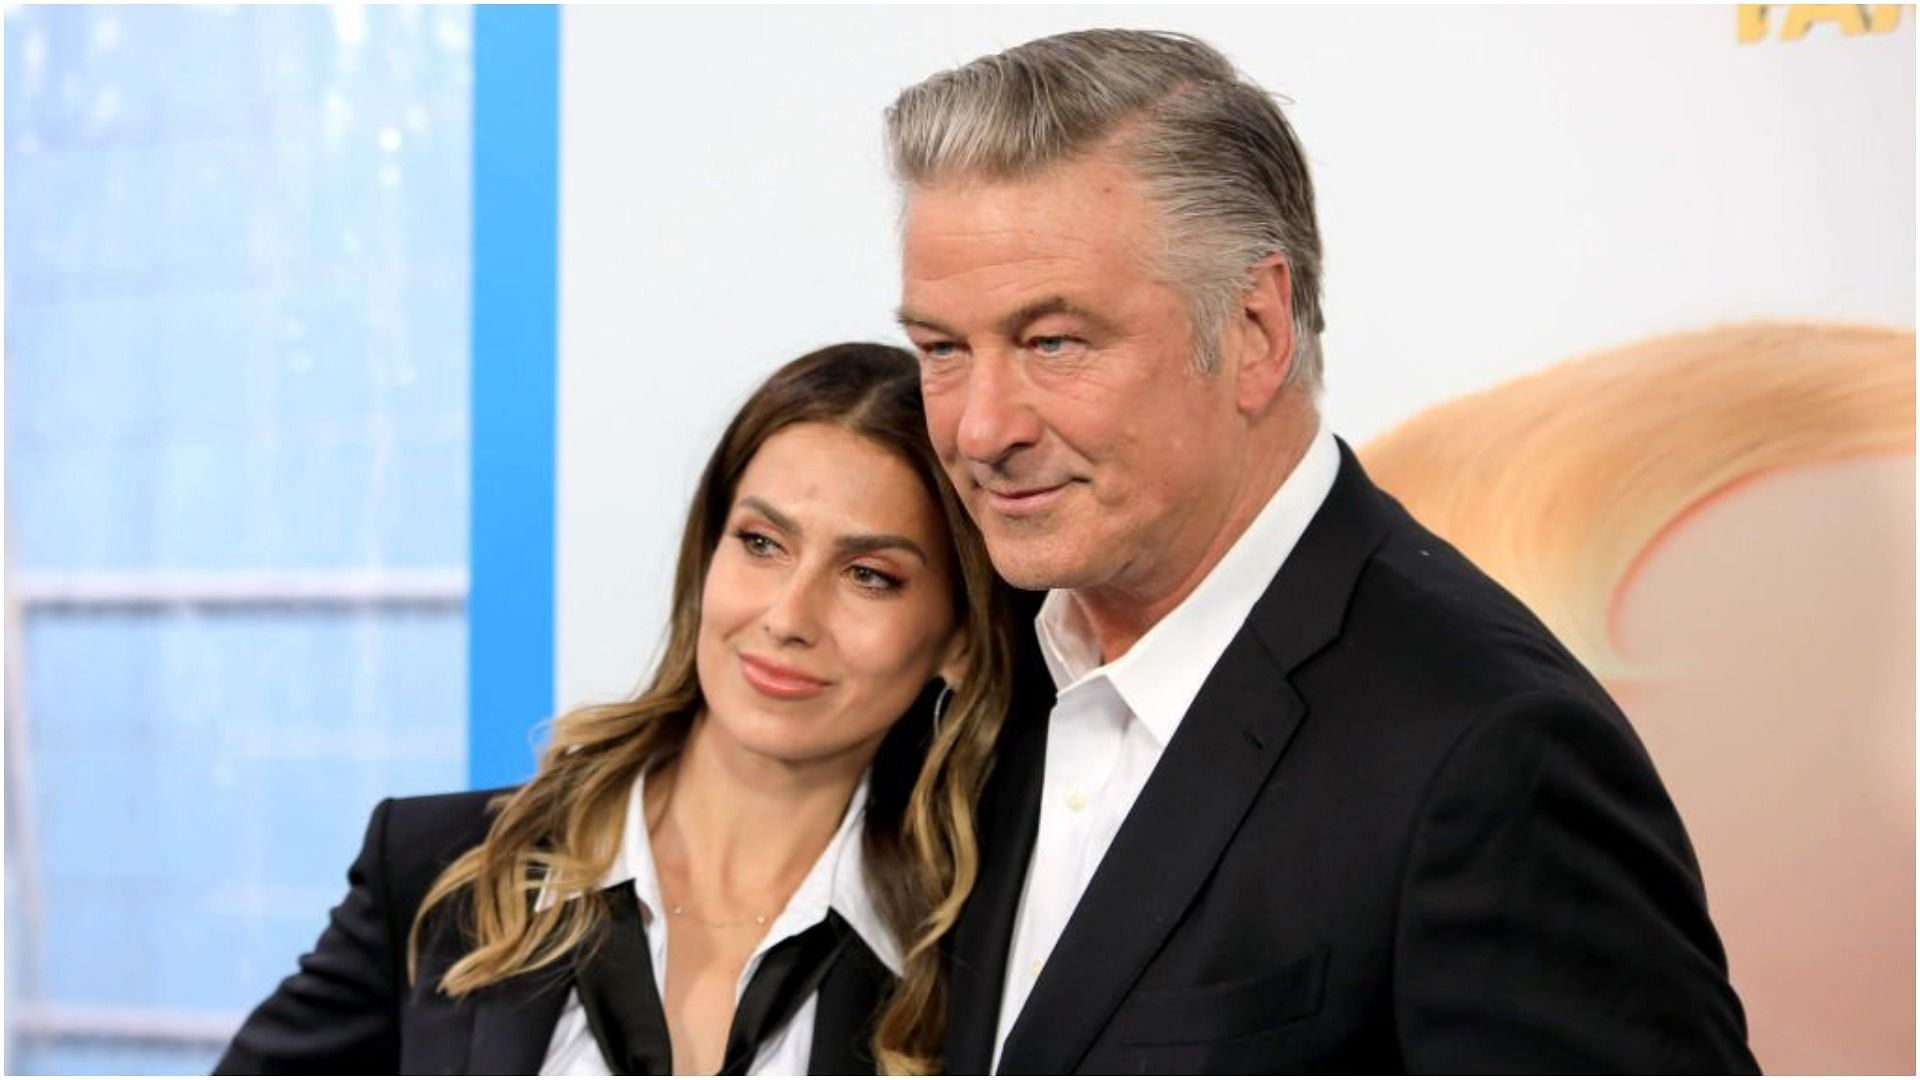 Alec Baldwin and Hilaria Baldwin are expecting their seventh child together (Image via Jason Mendez/Getty Images)